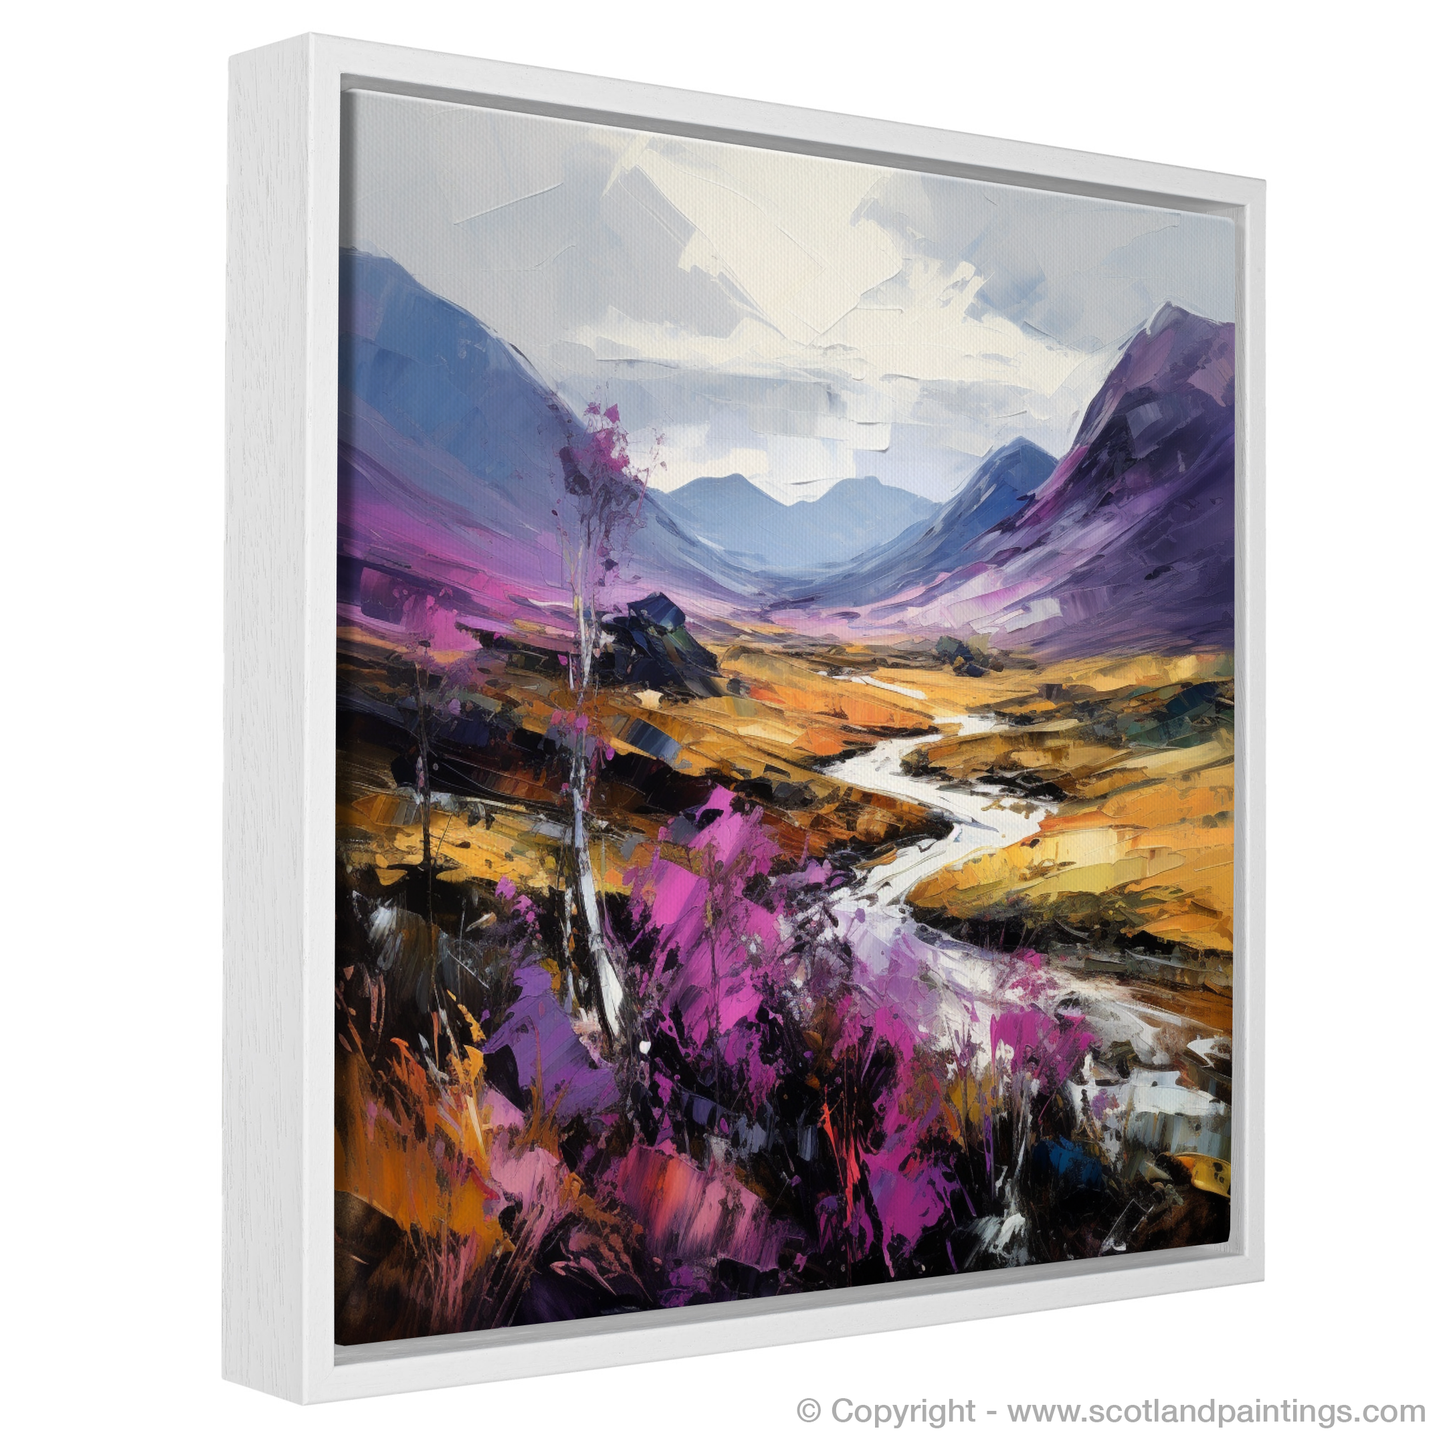 Painting and Art Print of Purple heather in Glencoe entitled "Heather Hues of Glencoe - An Expressionist Ode".